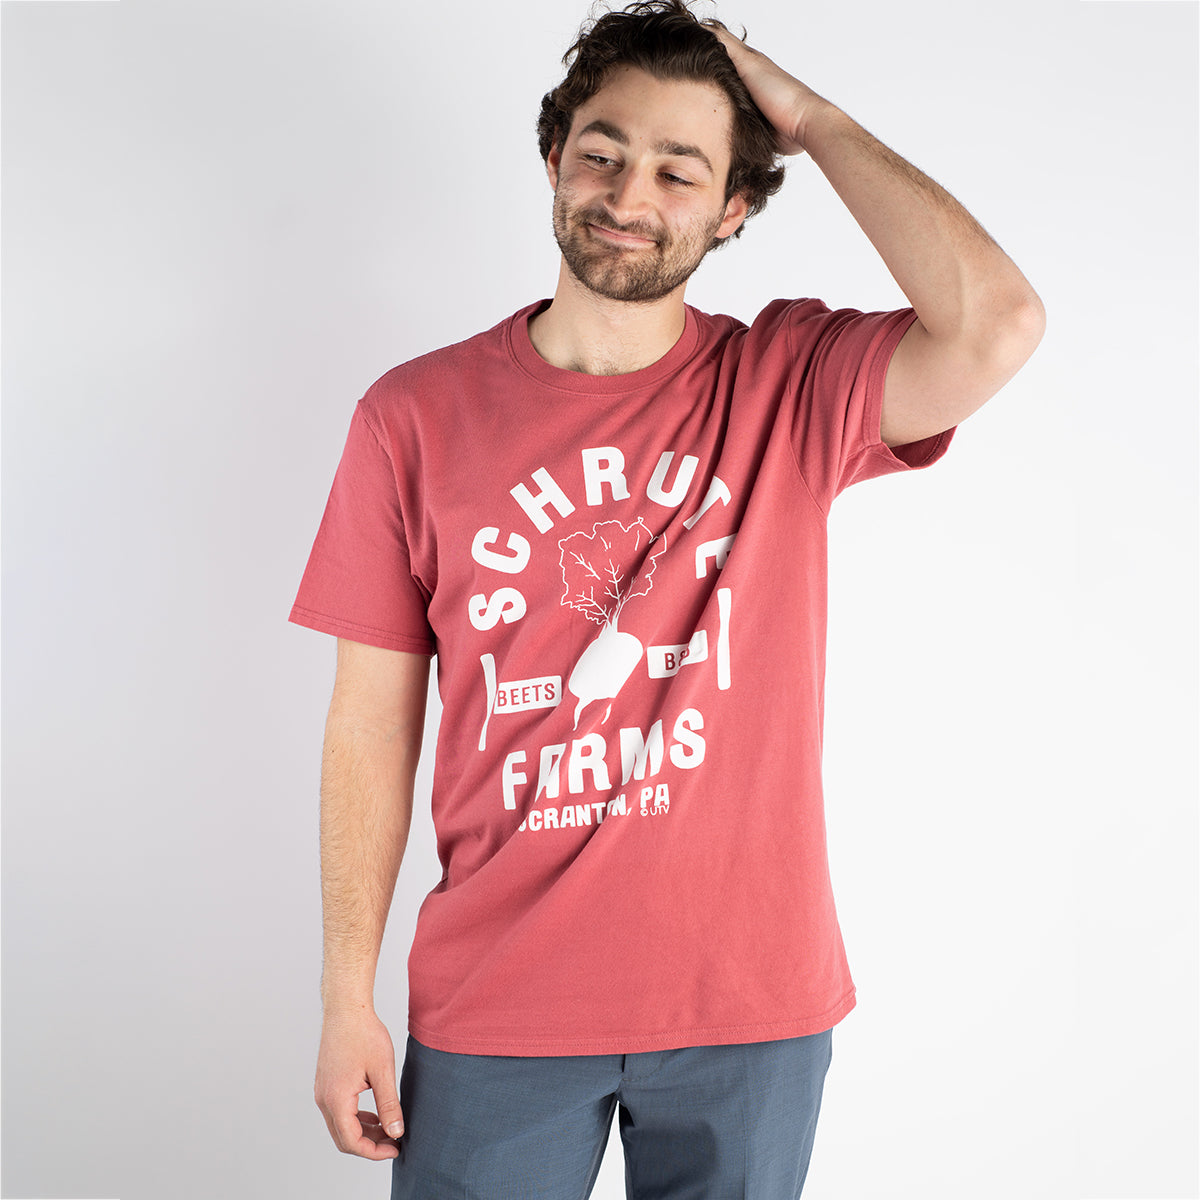 The Office Schrute Farms Vintage T-Shirt